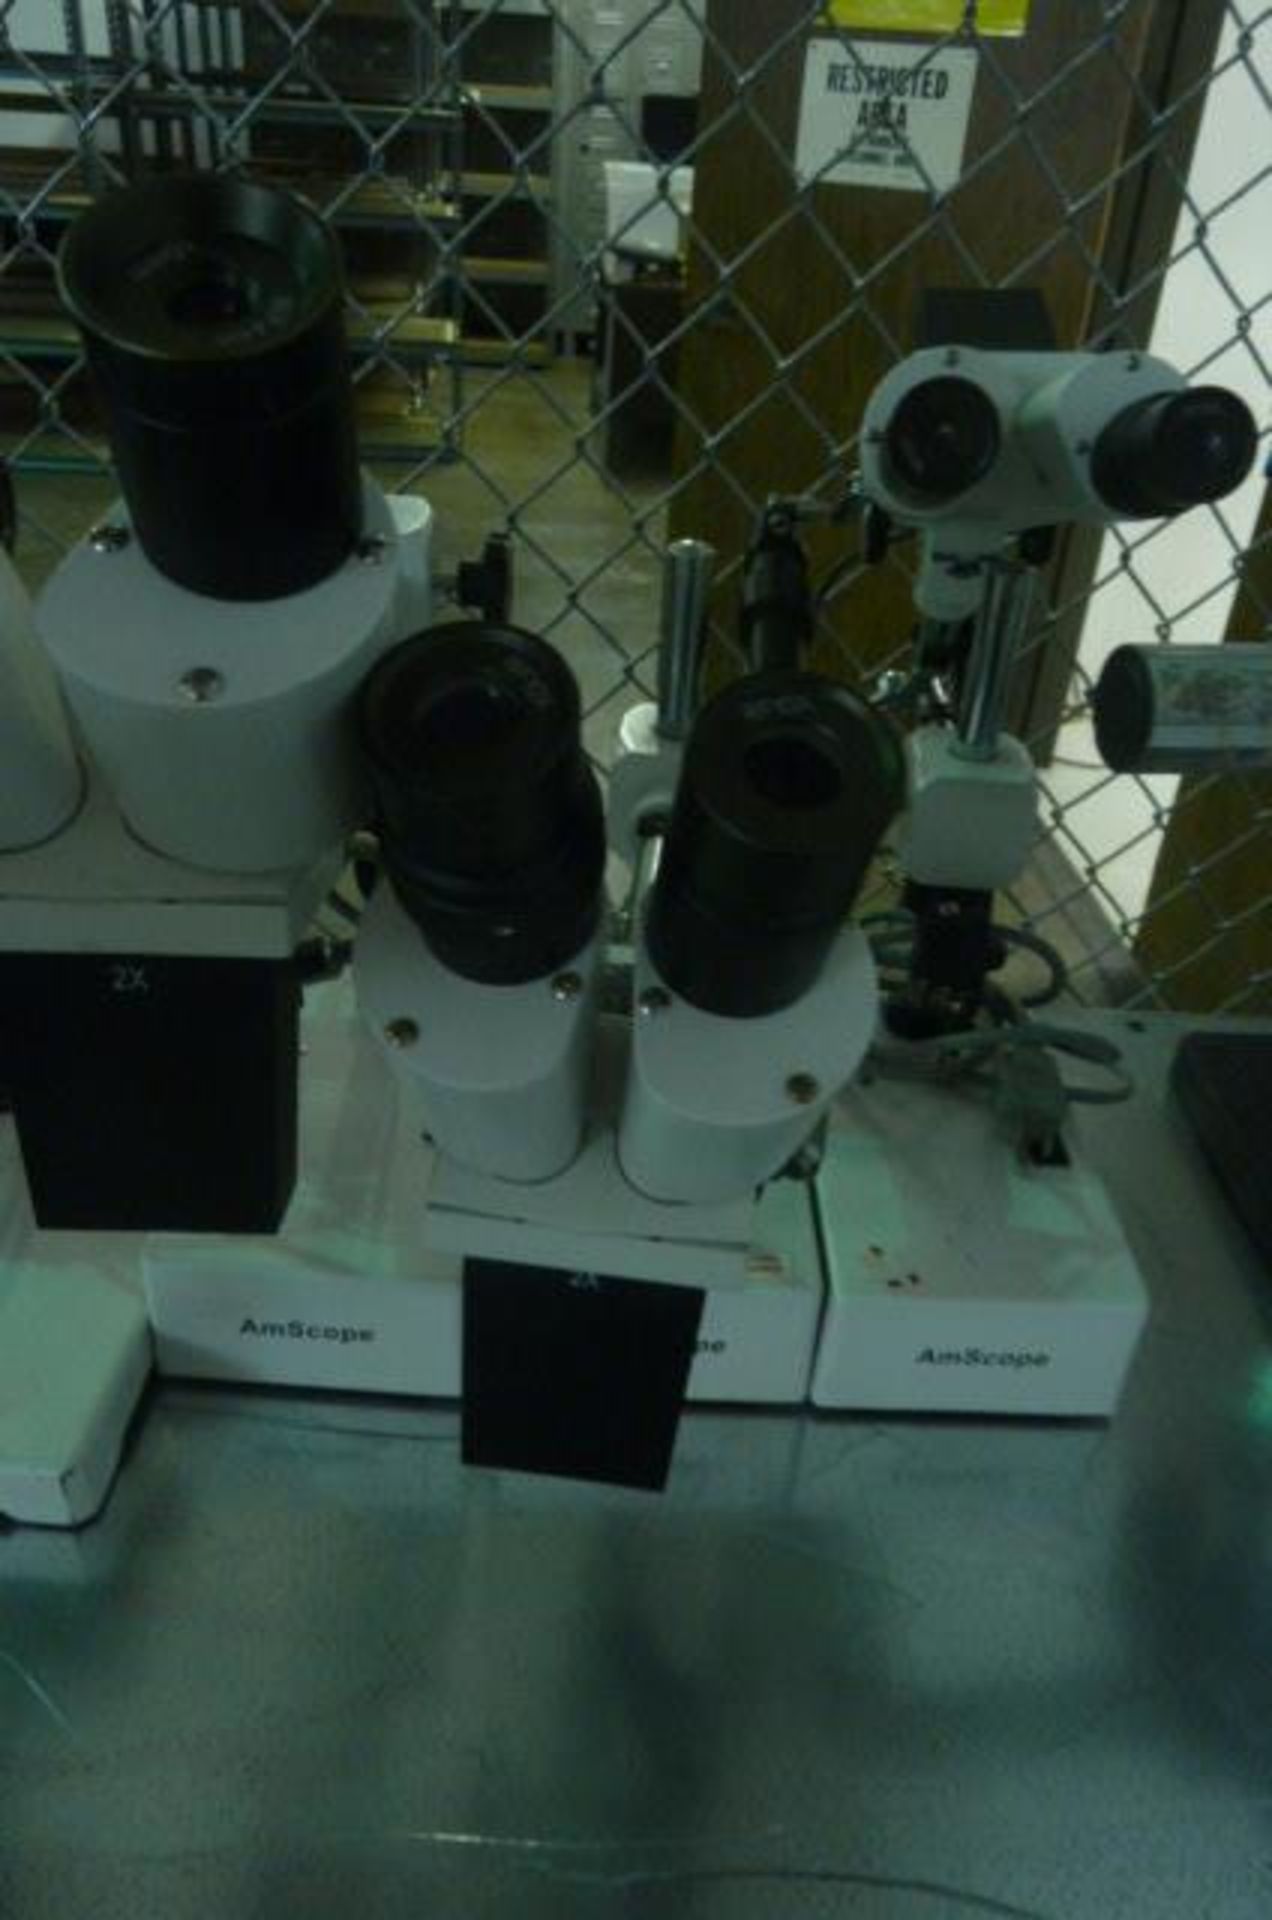 Microscopes by Scienscope, Aven, AmScope, SteroZoom SZ-4 - Image 6 of 8